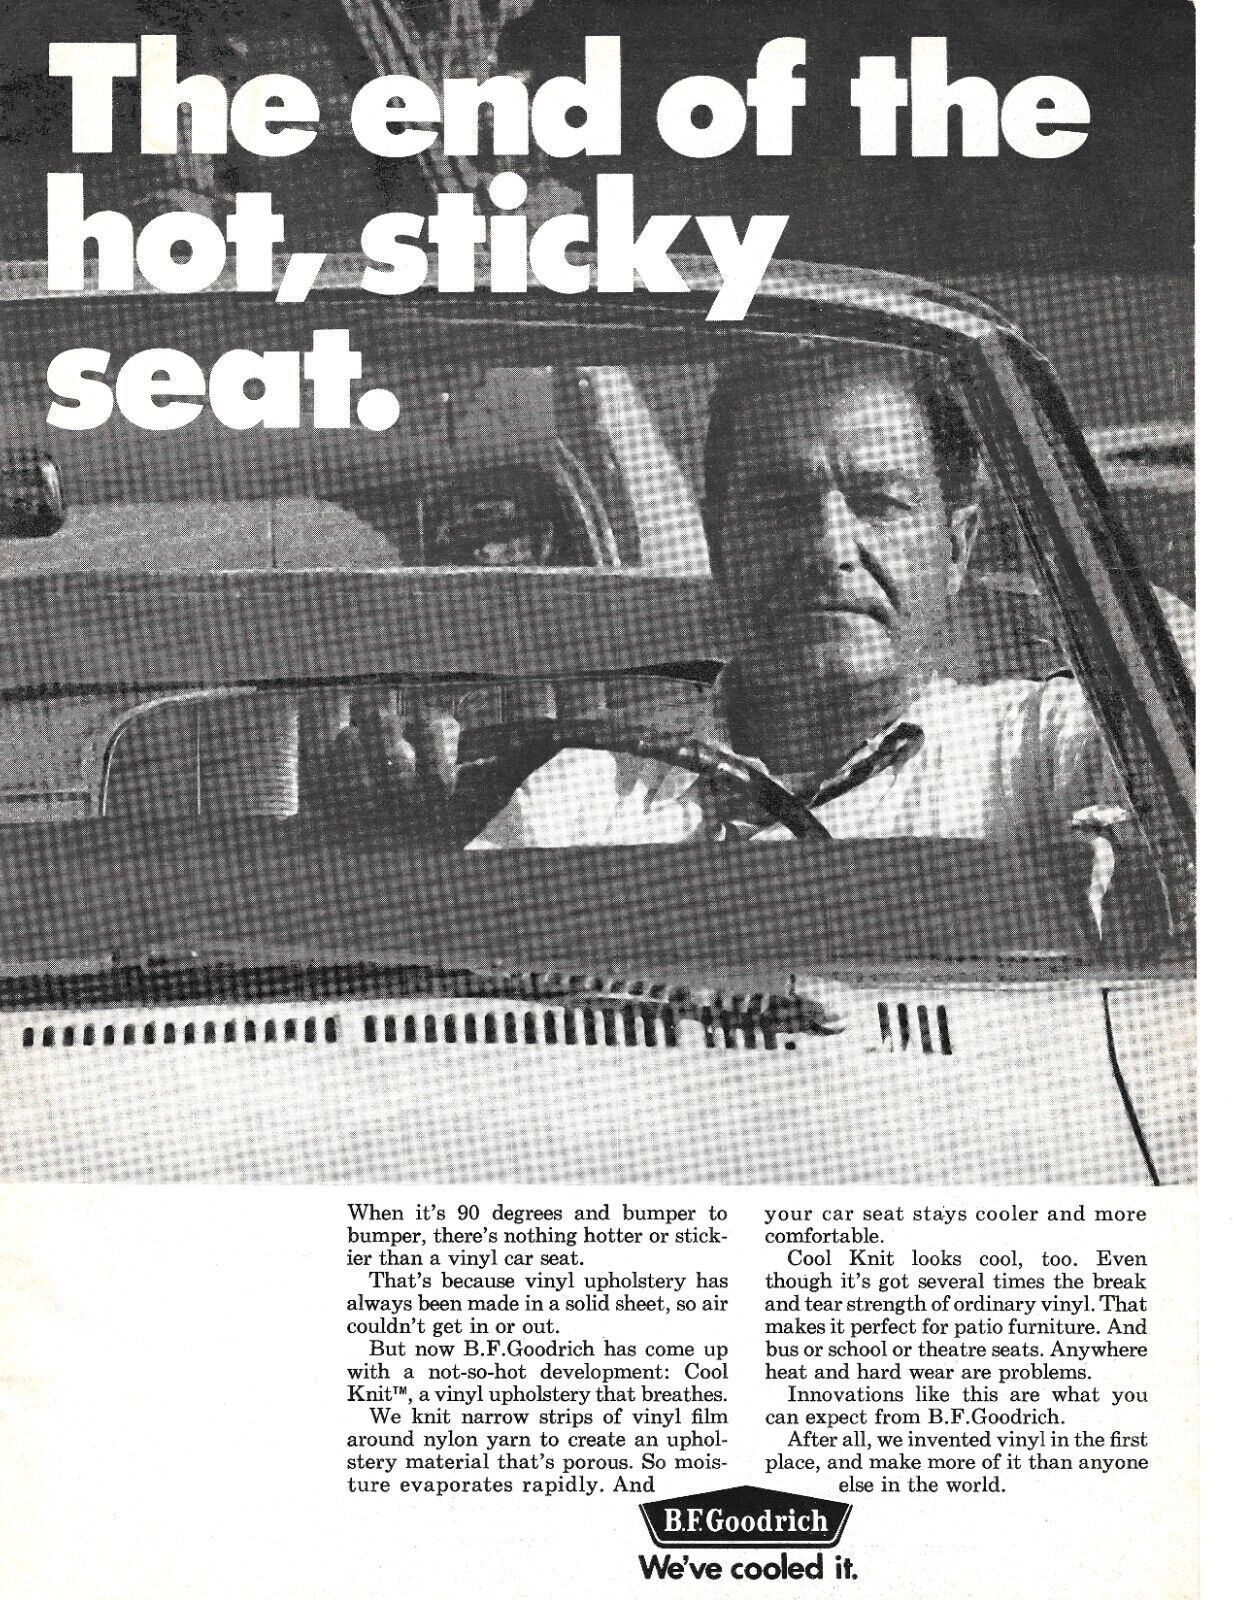 1969 Vintage Print Ad B.F. Goodrich End of the Sticky Seat Cool Knit Technology